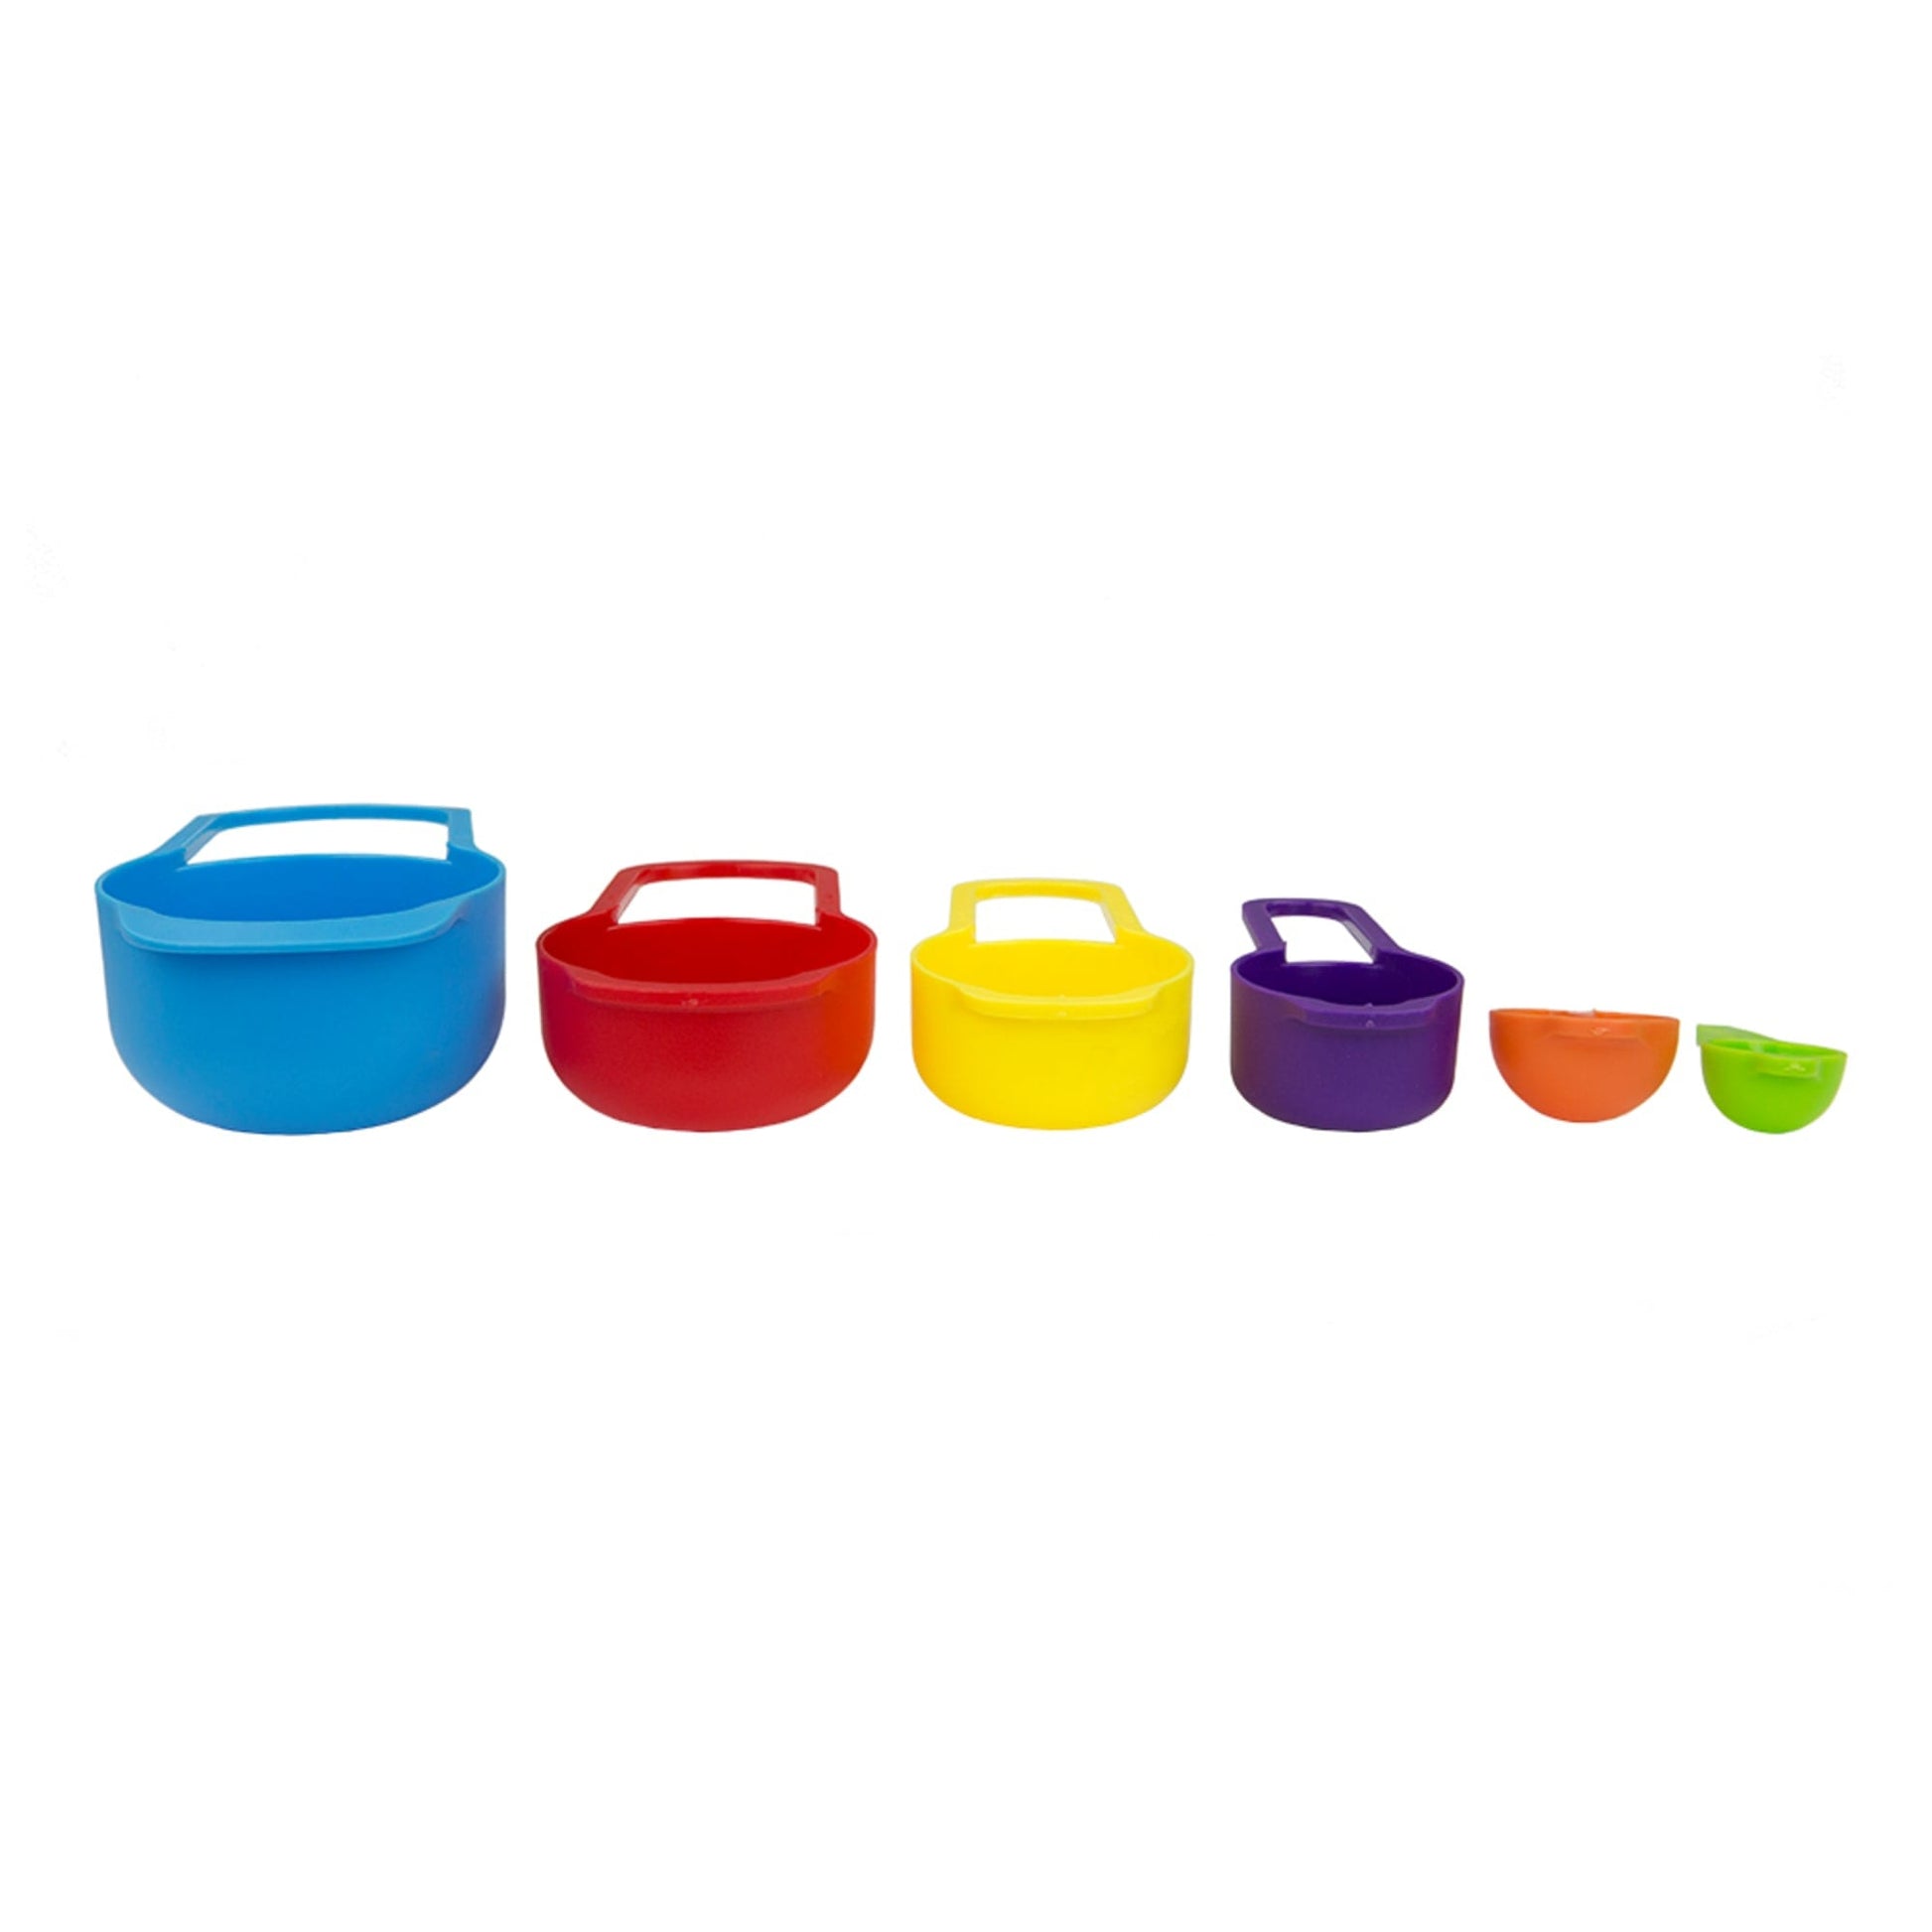 Acadia Measuring Cups, Set of 4 – Be Home